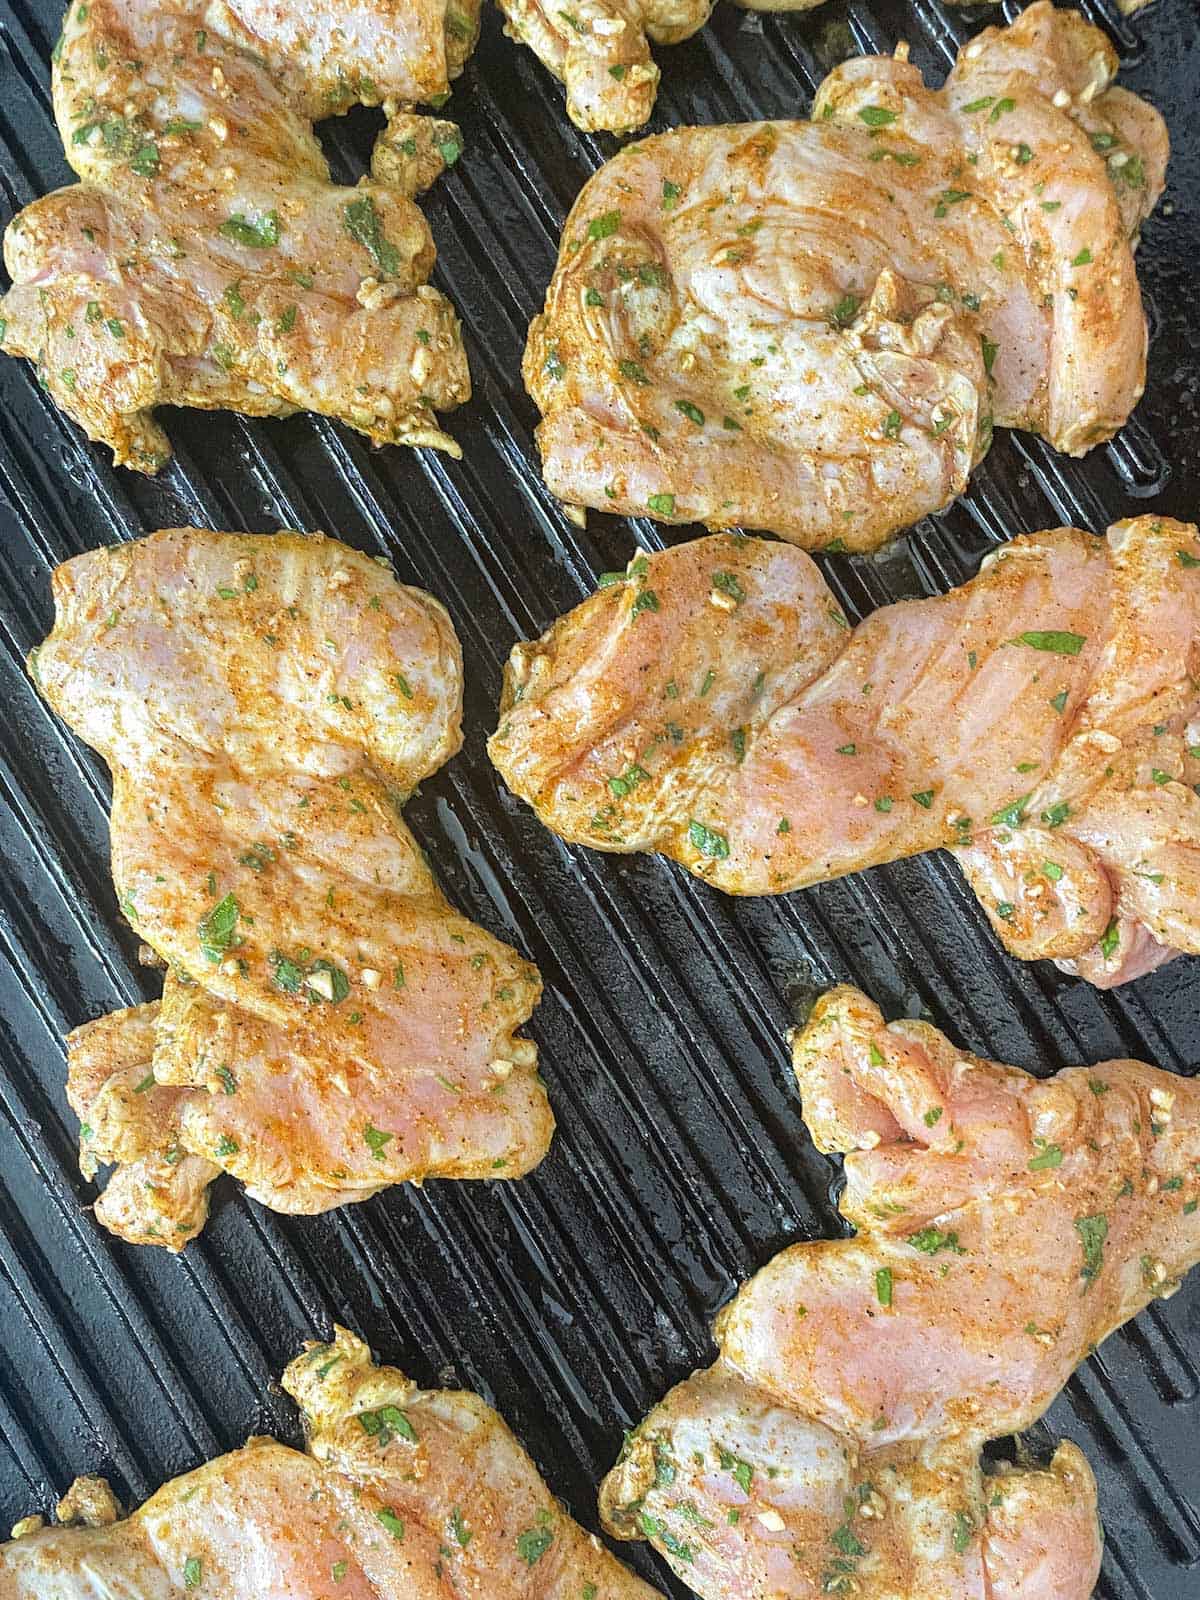 Grilled chicken thighs with mediterranean spices on a grill pan.